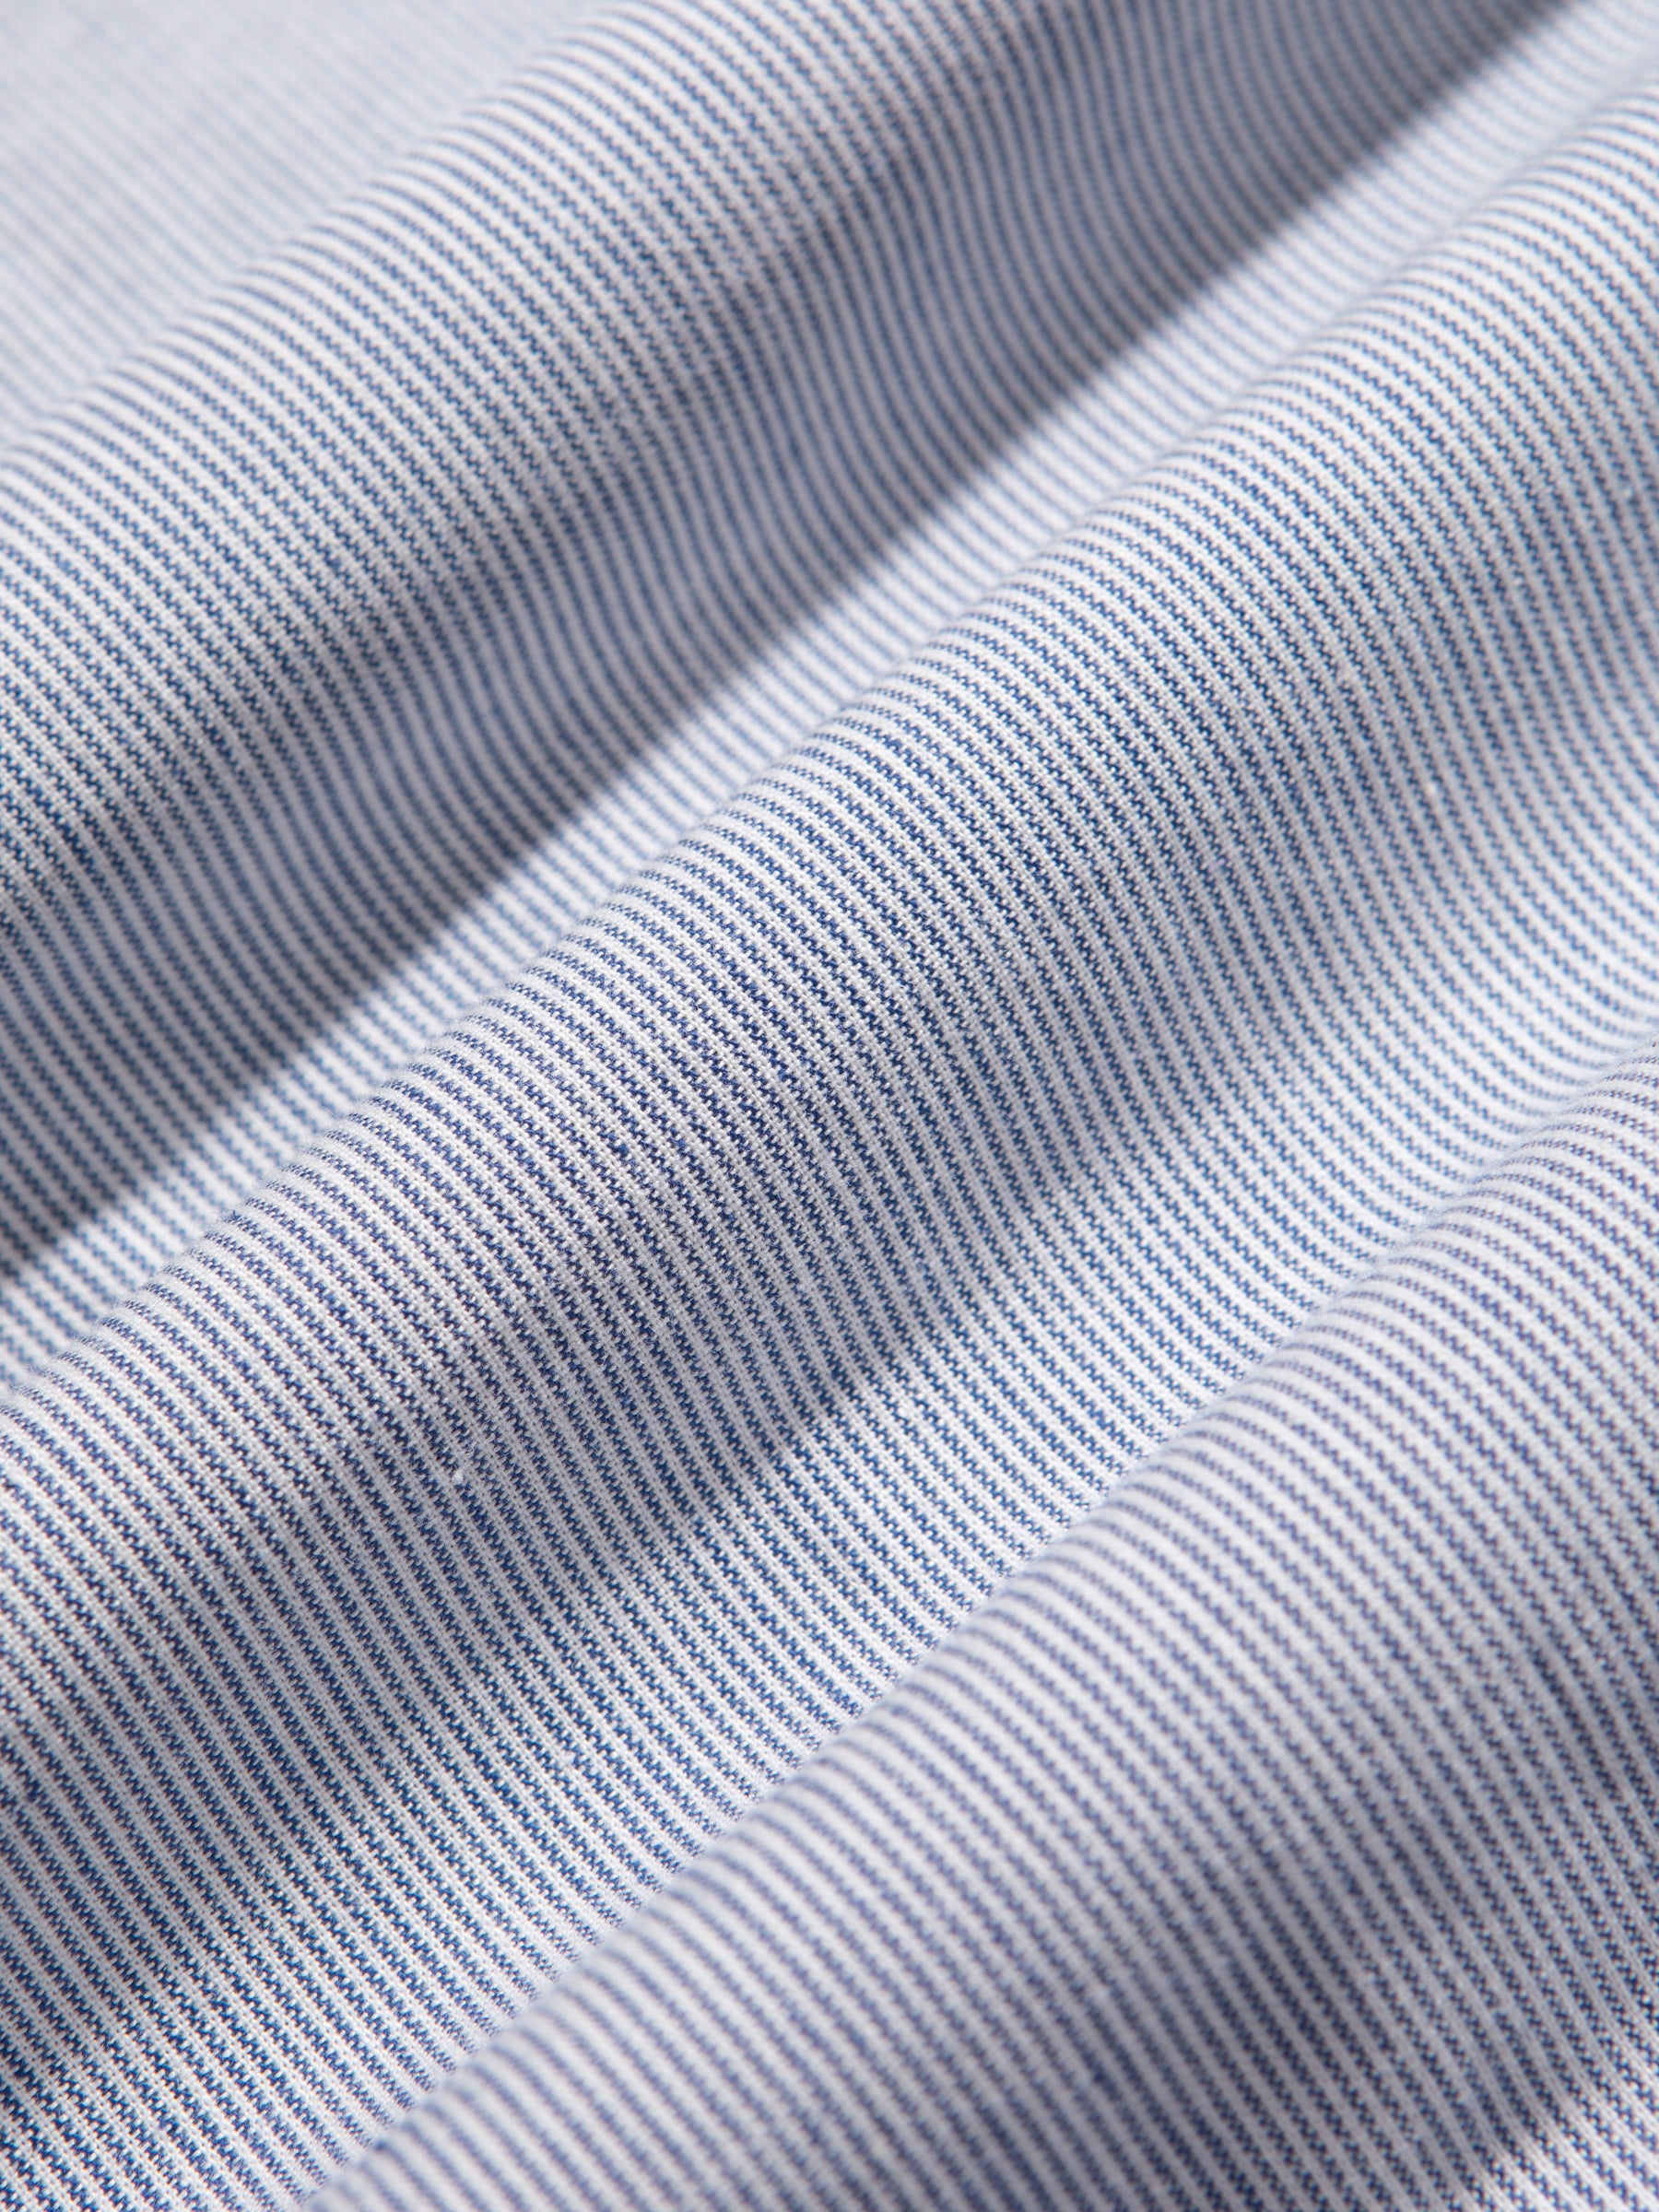 A white and blue striped fabric from the Raeburn Shirt by menswear brand KESTIN.